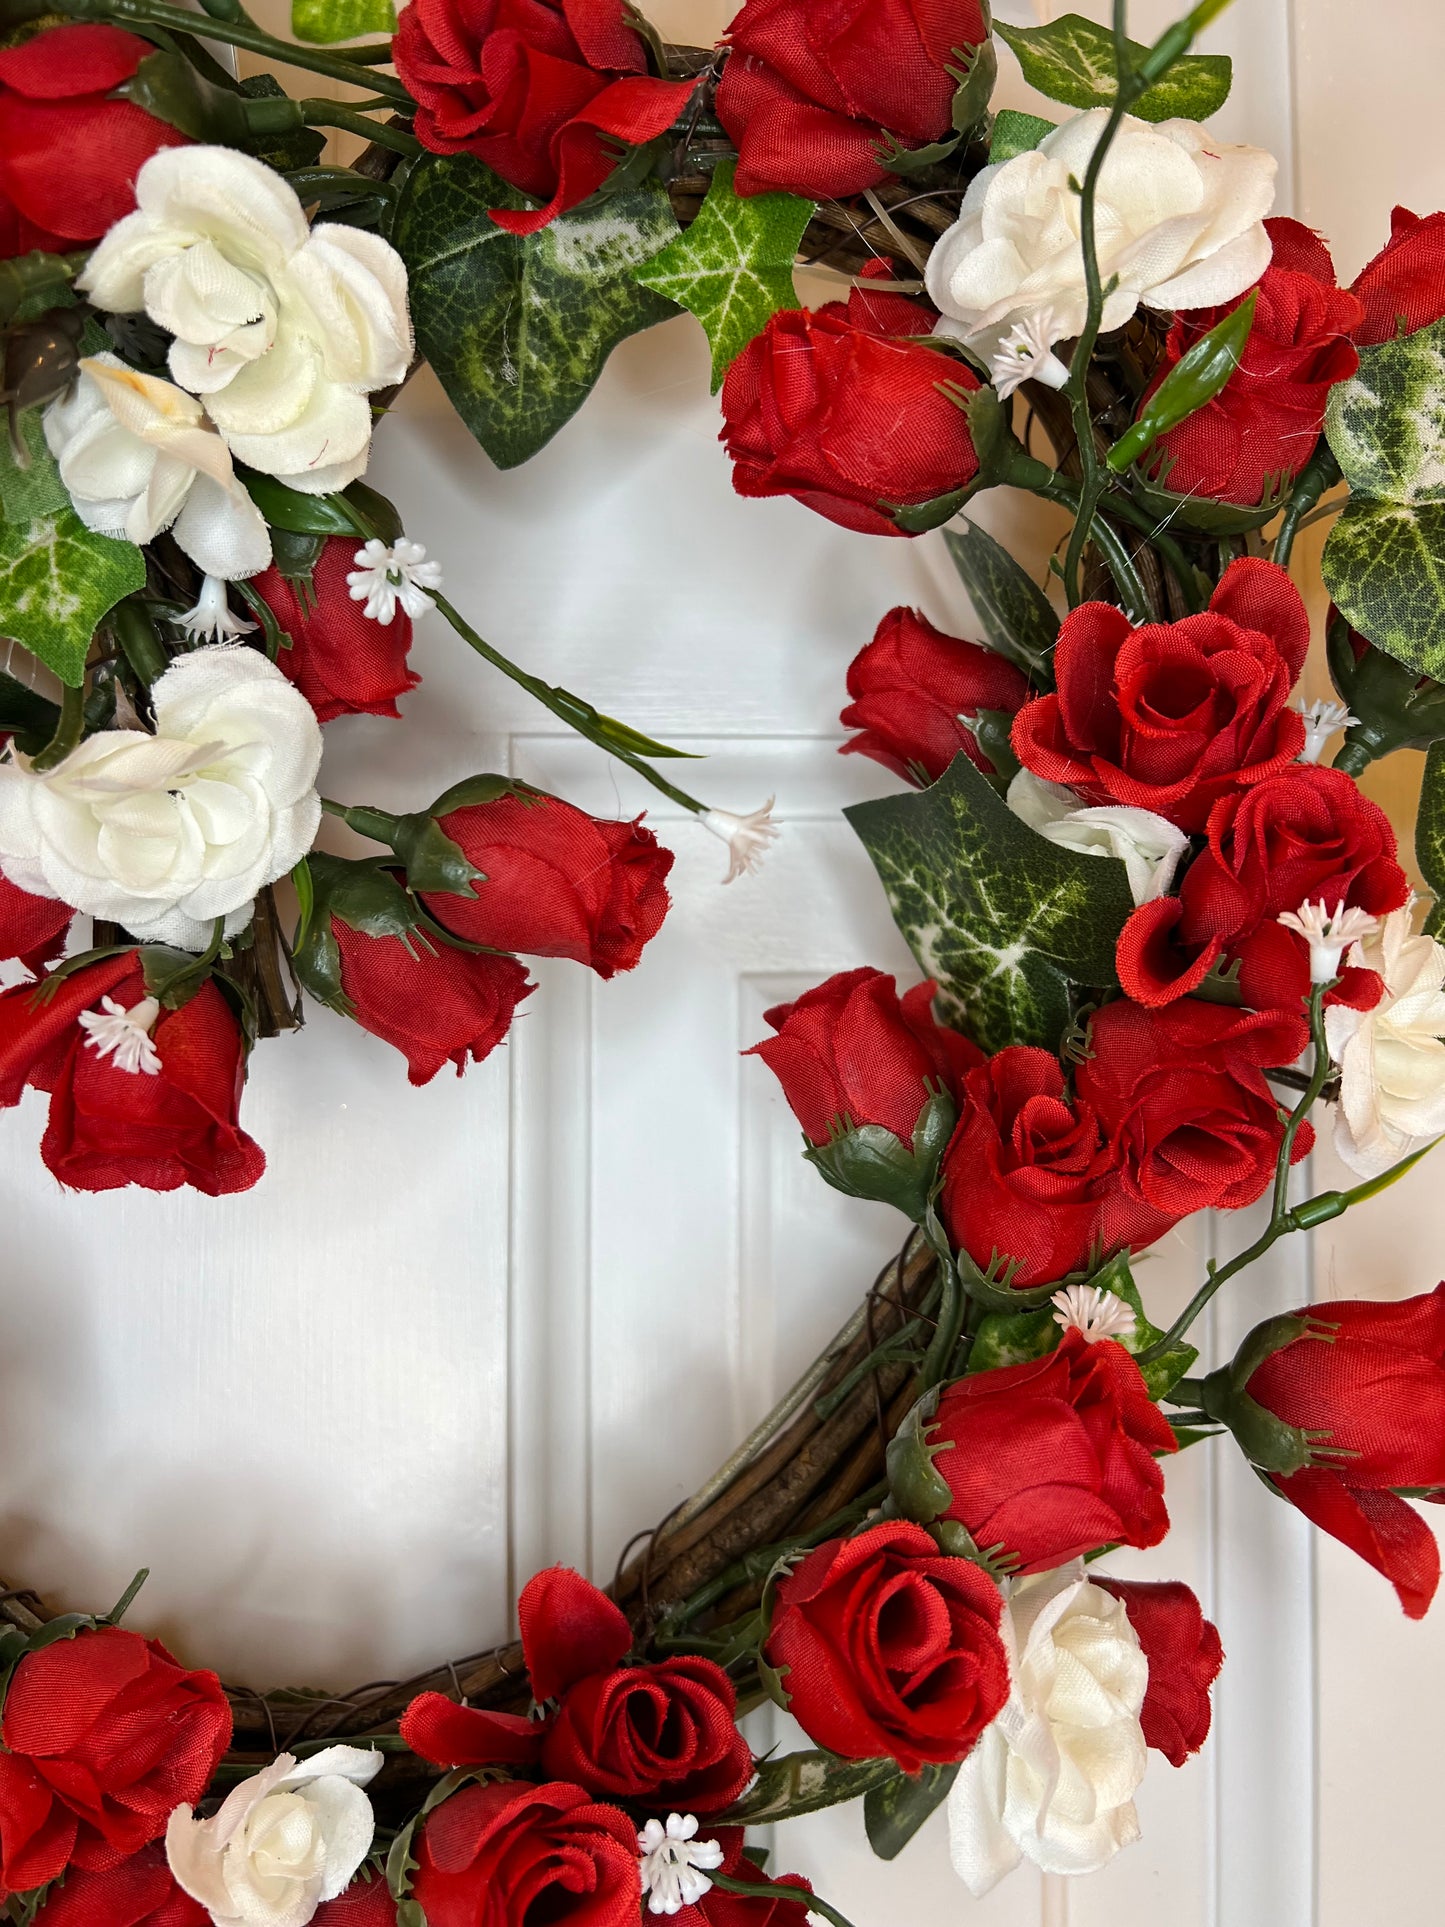 14" Red & White Roses Heart Wreath